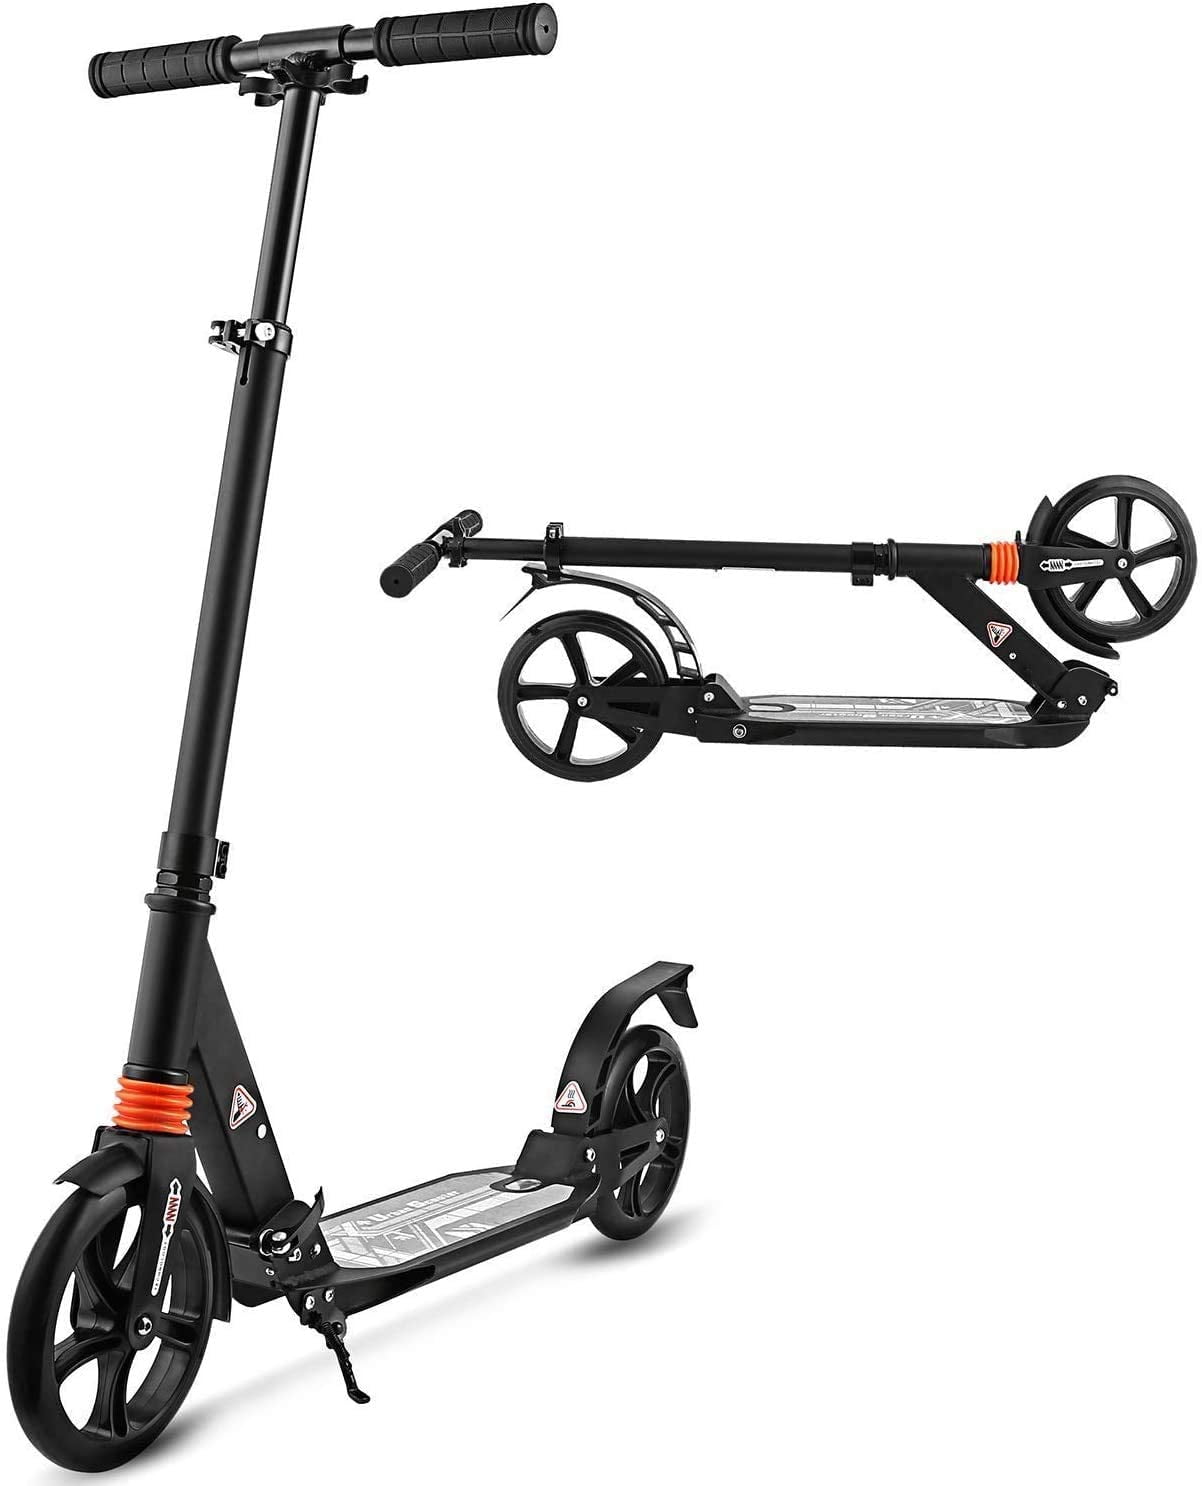 Scooters for Adults Teens, Kick Scooter with Adjustable Height Dual Suspension and Shoulder Strap 8 inches Big Wheels Scooter Smooth Ride Commuter Scooter Best Gift for Kids Age 10 Up Walmart.com